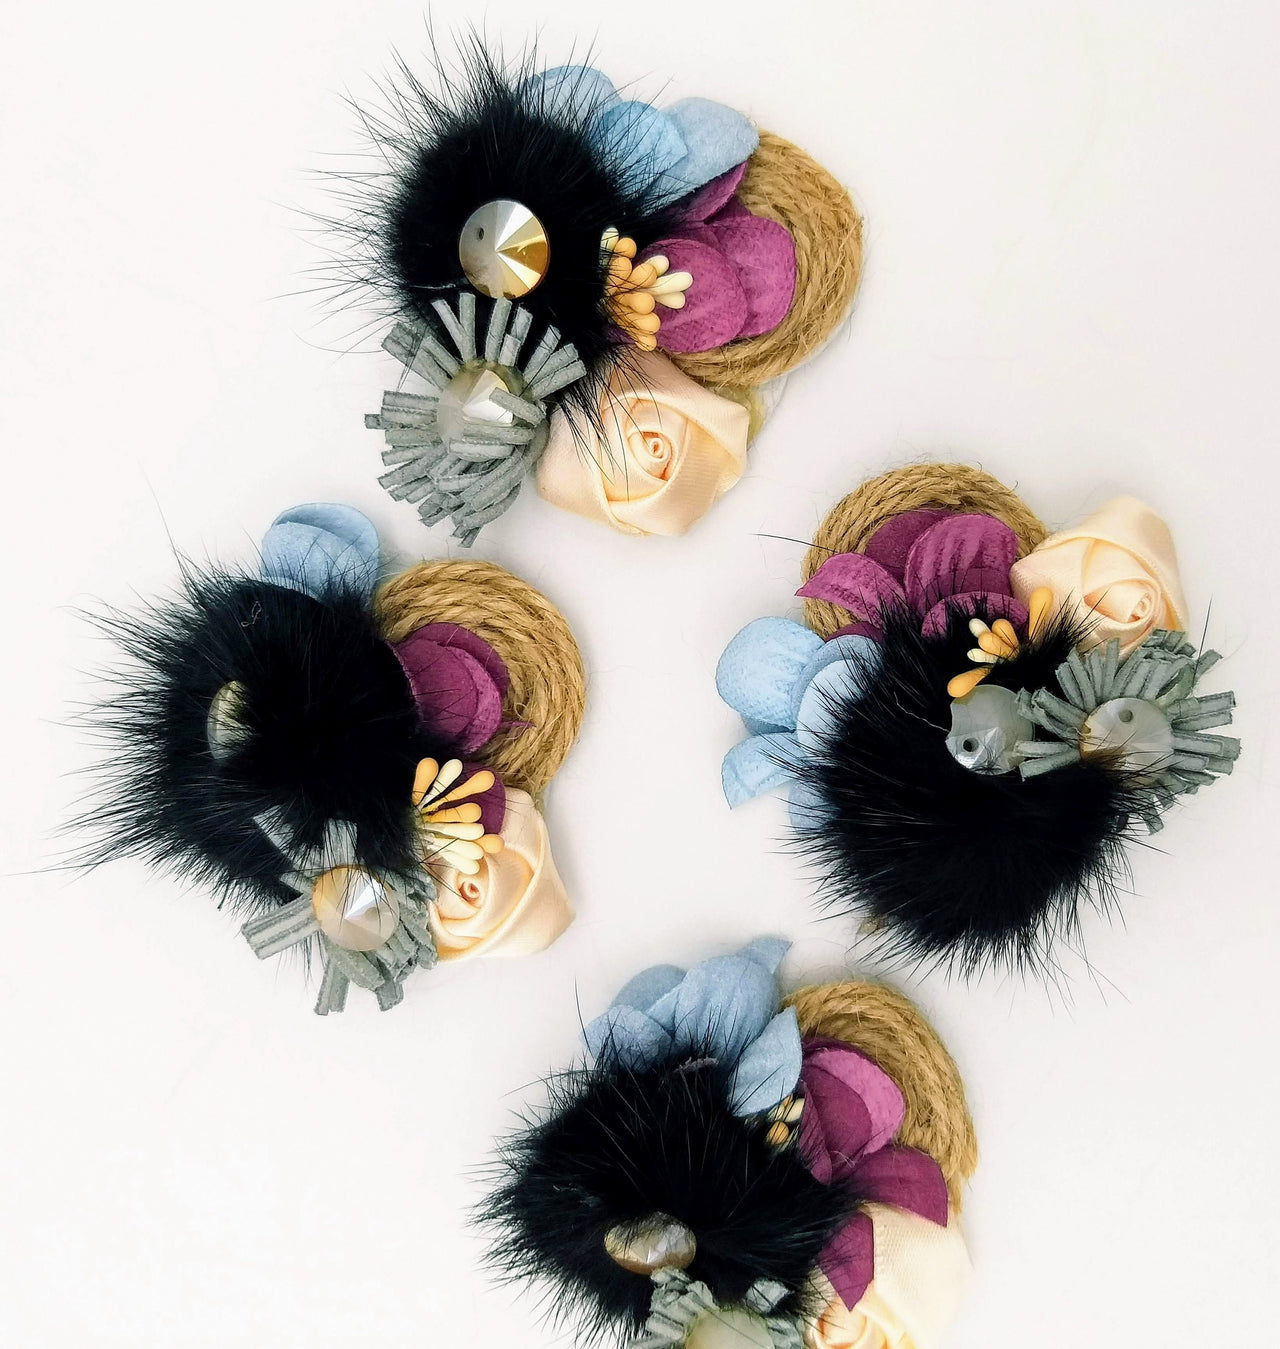 Hand Embroidered Black and Beige Floral Applique With Feather Pom Poms and Stones, 2 Pcs